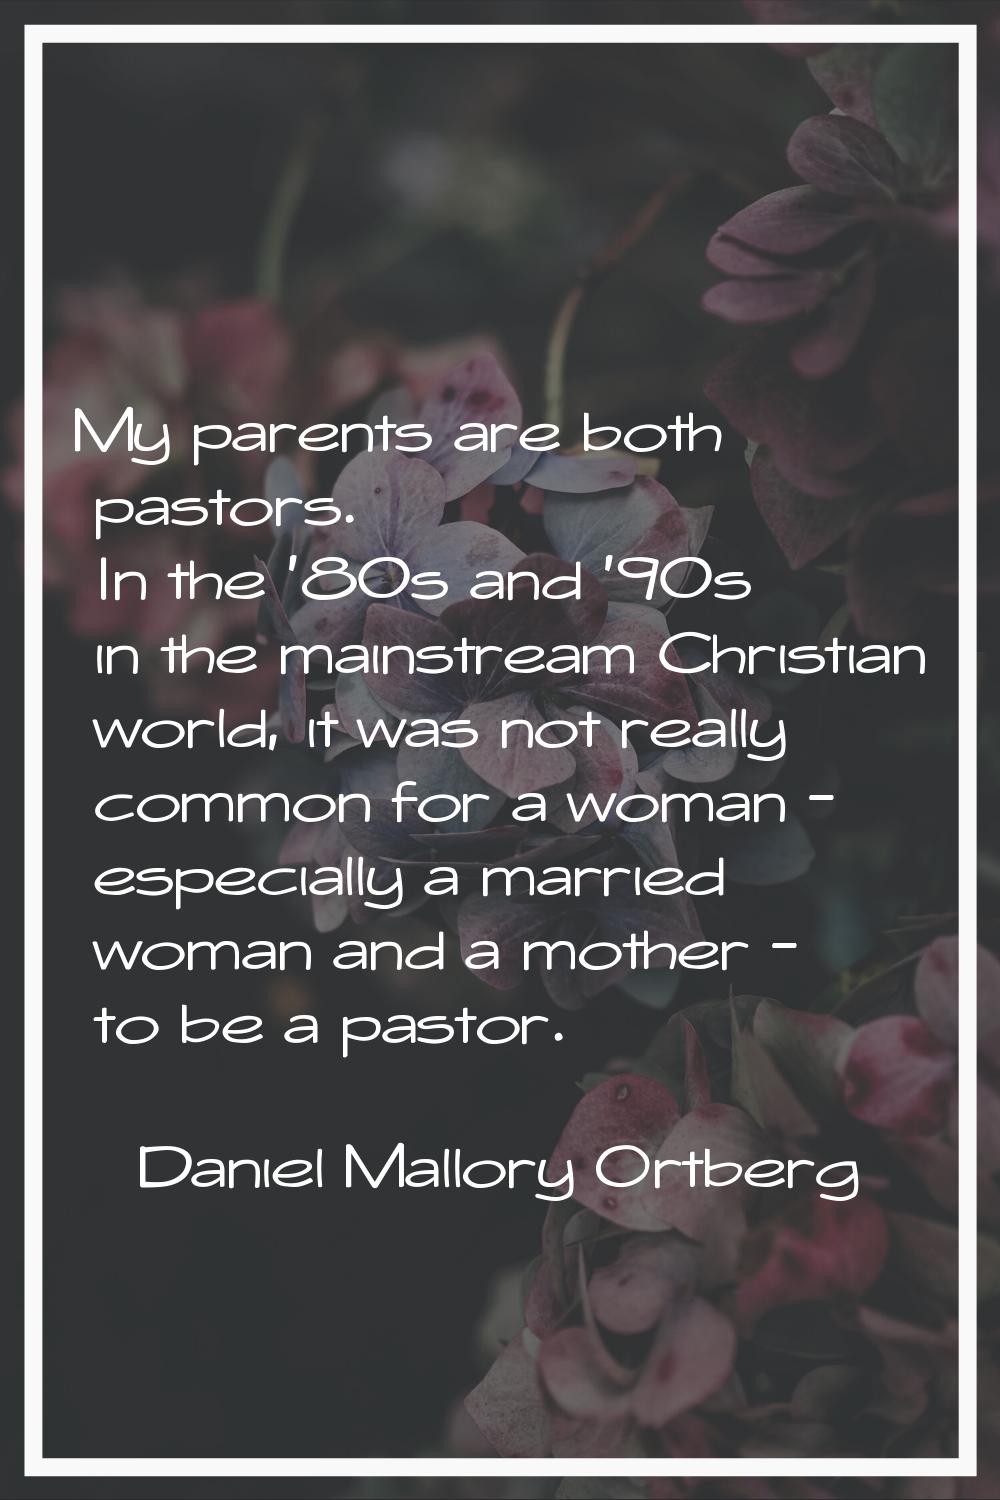 My parents are both pastors. In the '80s and '90s in the mainstream Christian world, it was not rea